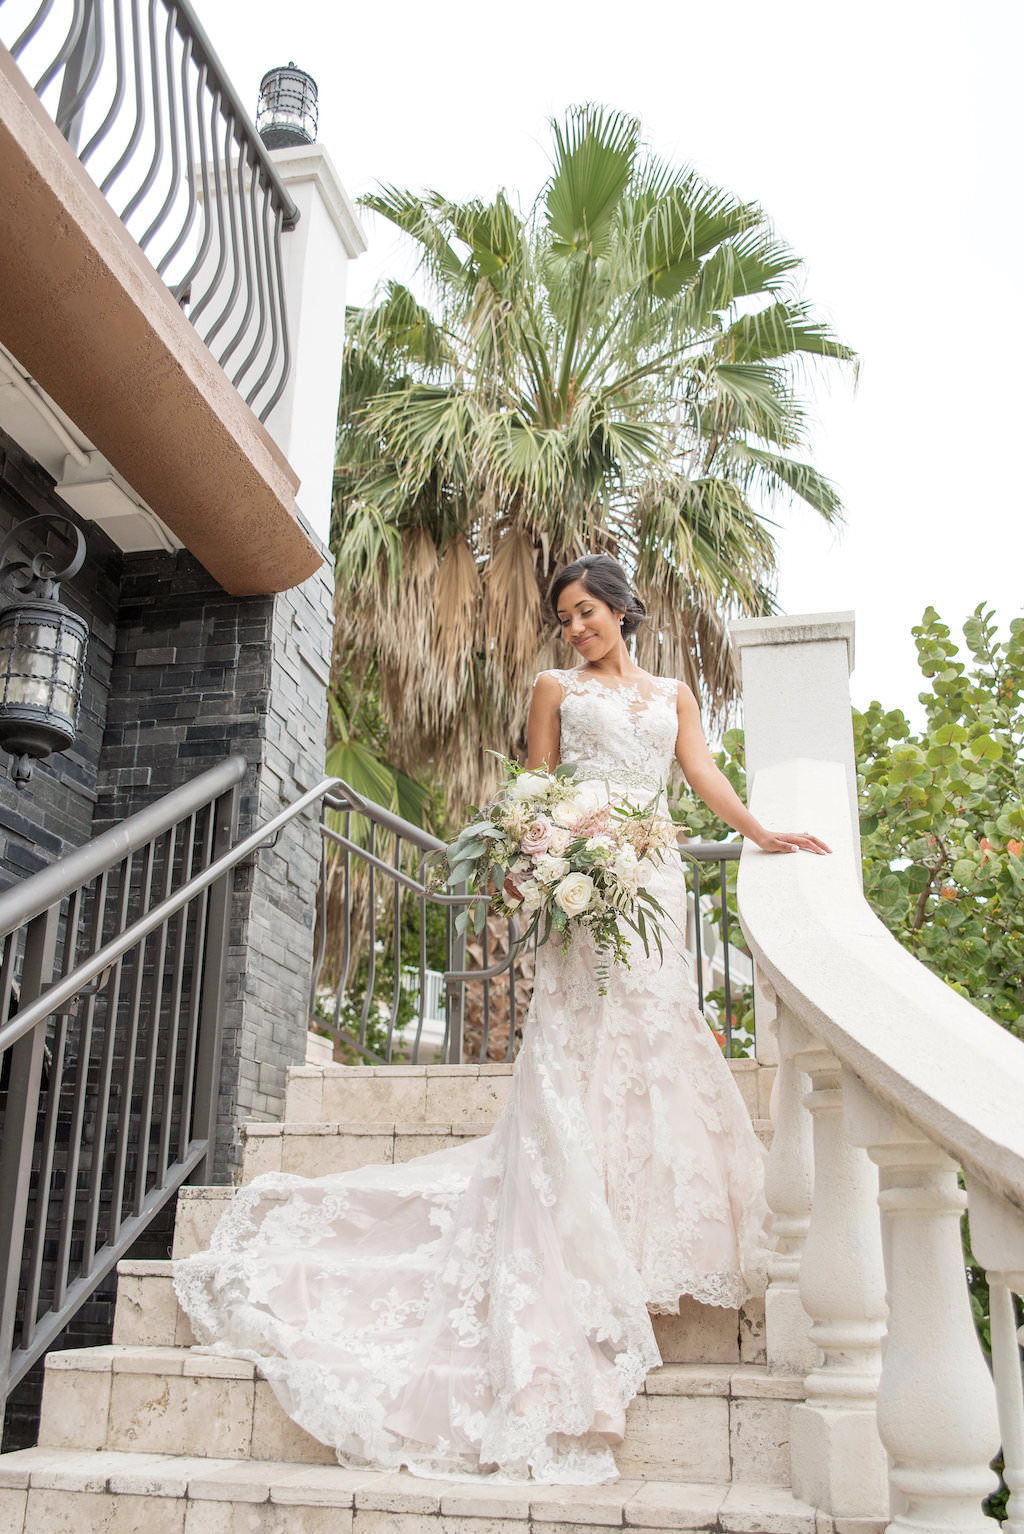 Florida Bride Outdoor Wedding Portrait on Staircase in Fitted Allure Lace and Illusion Cap Sleeve Wedding Dress with Organic Garden Inspired Floral Bouquet | Tampa Bay Wedding Photographer Kristen Marie Photography